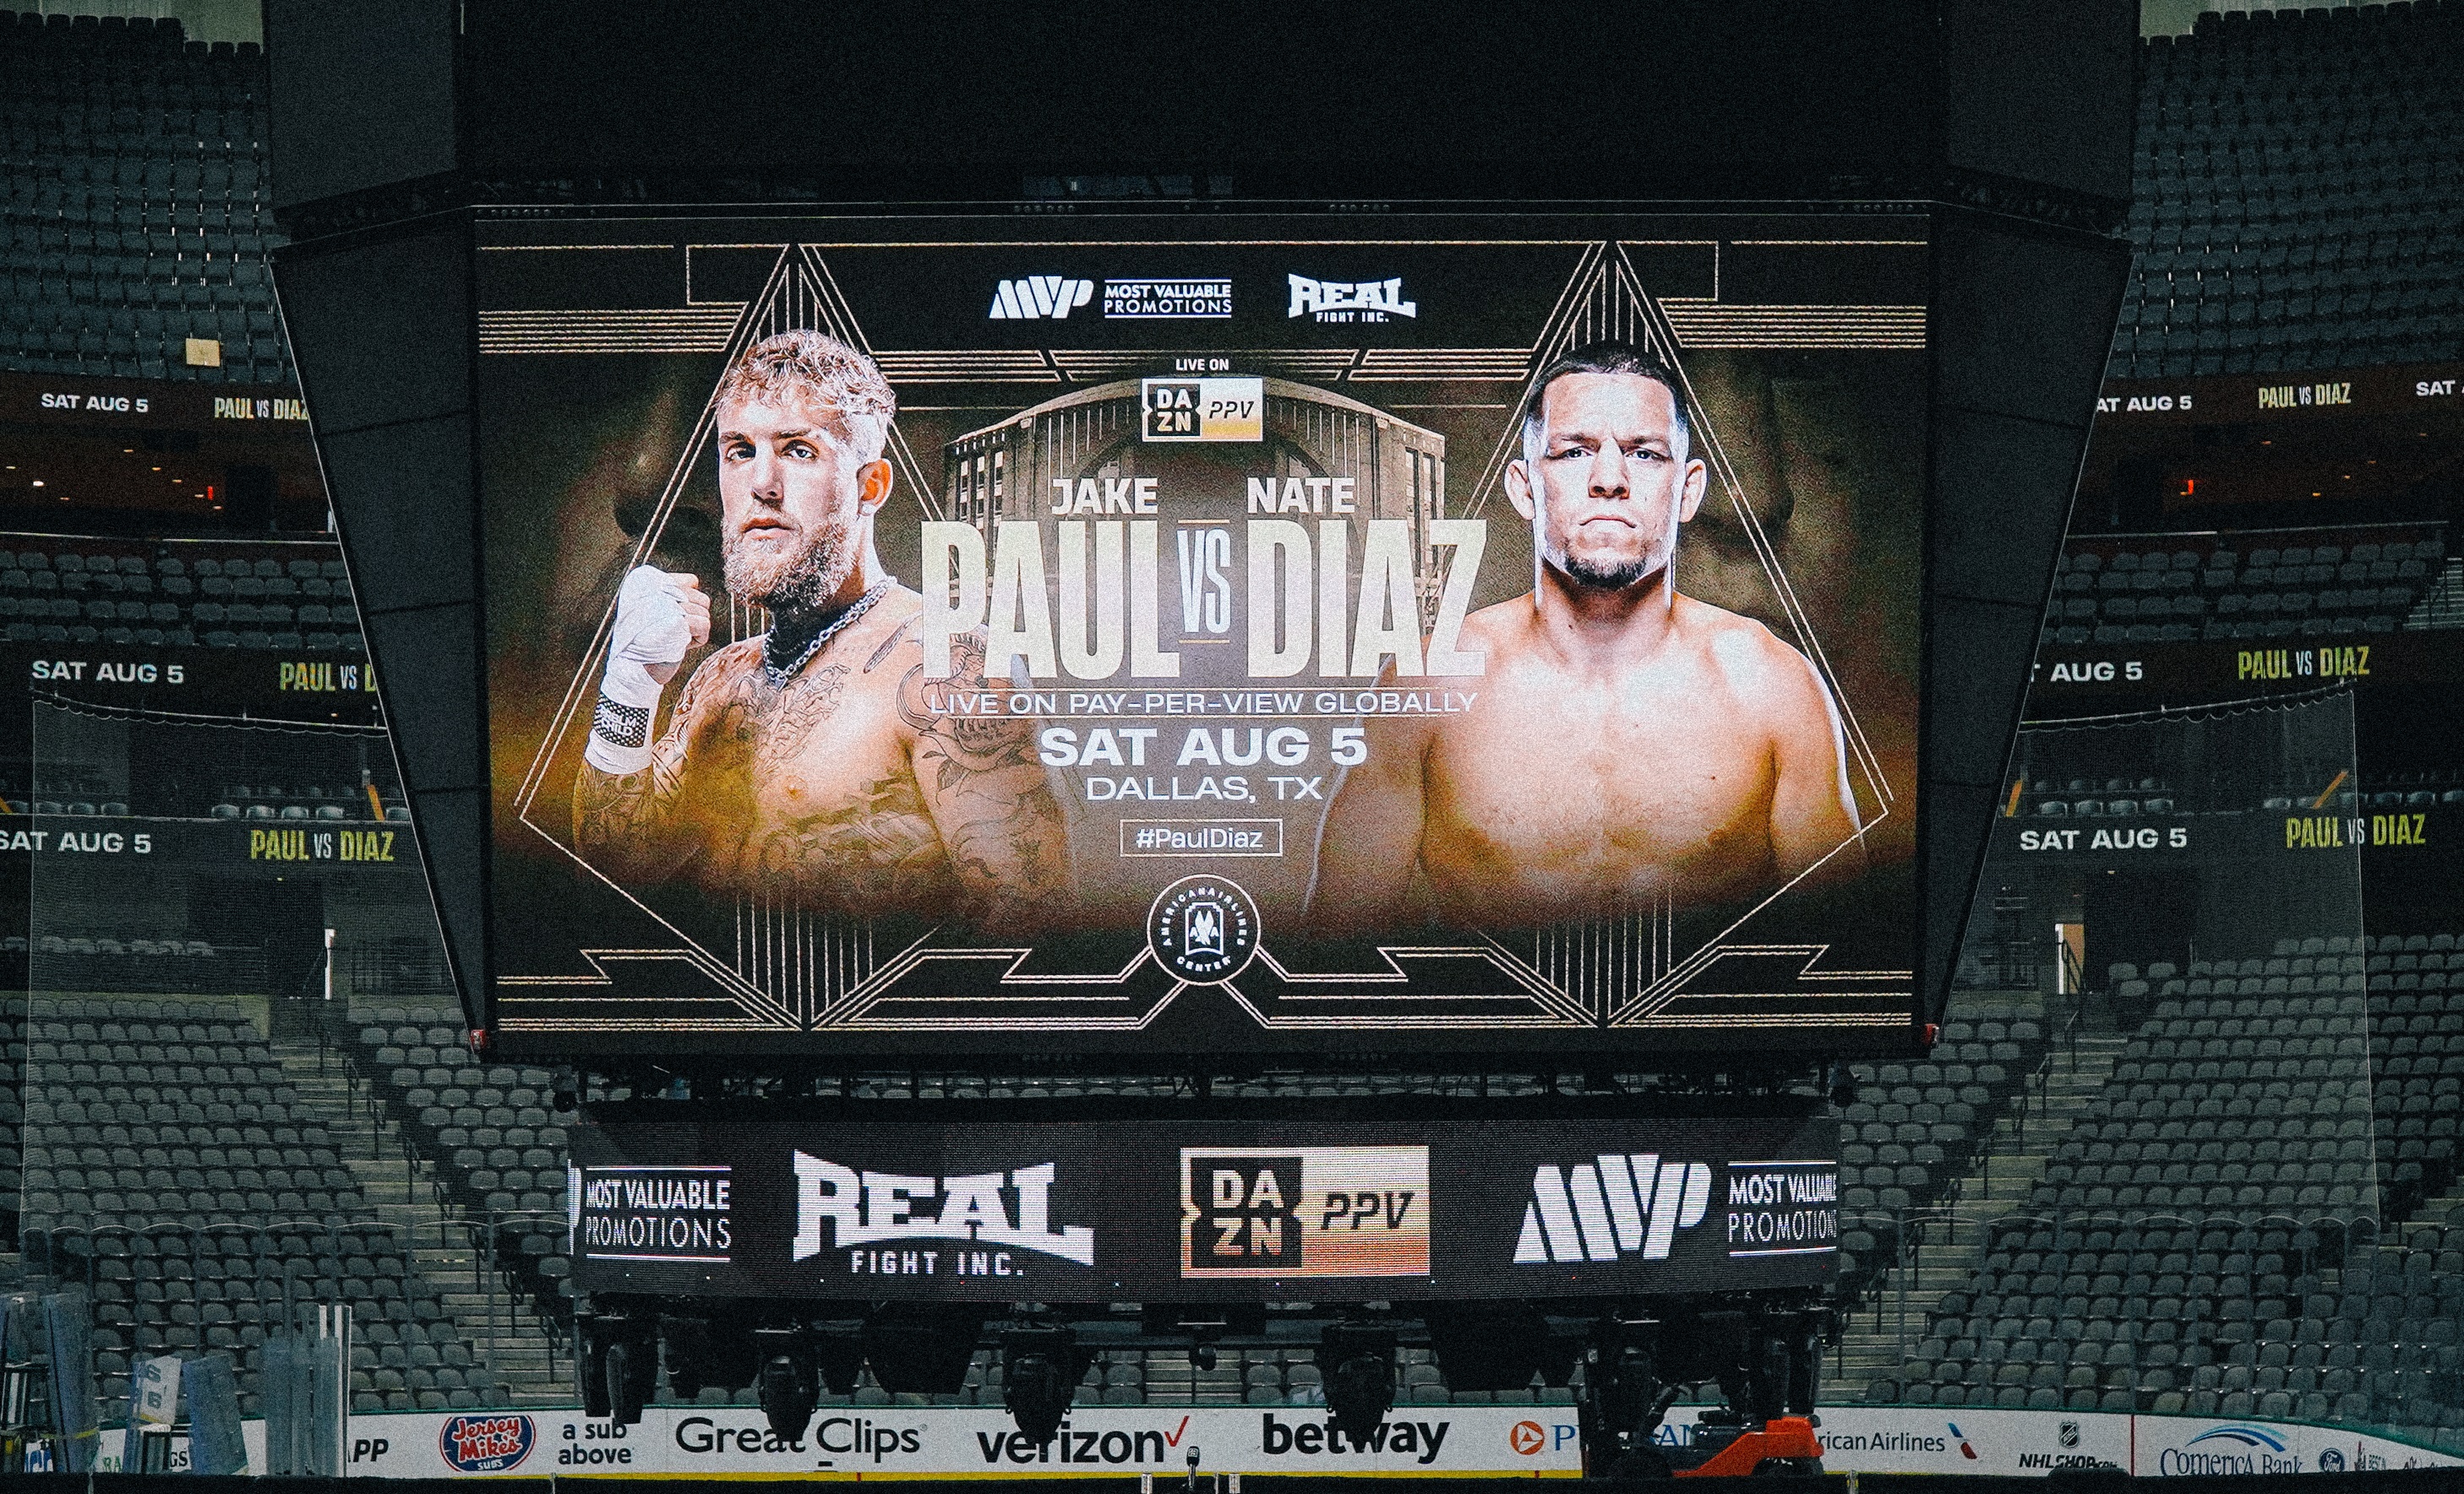 Fight week schedule, events announced for Jake Paul-Nate Diaz in Dallas